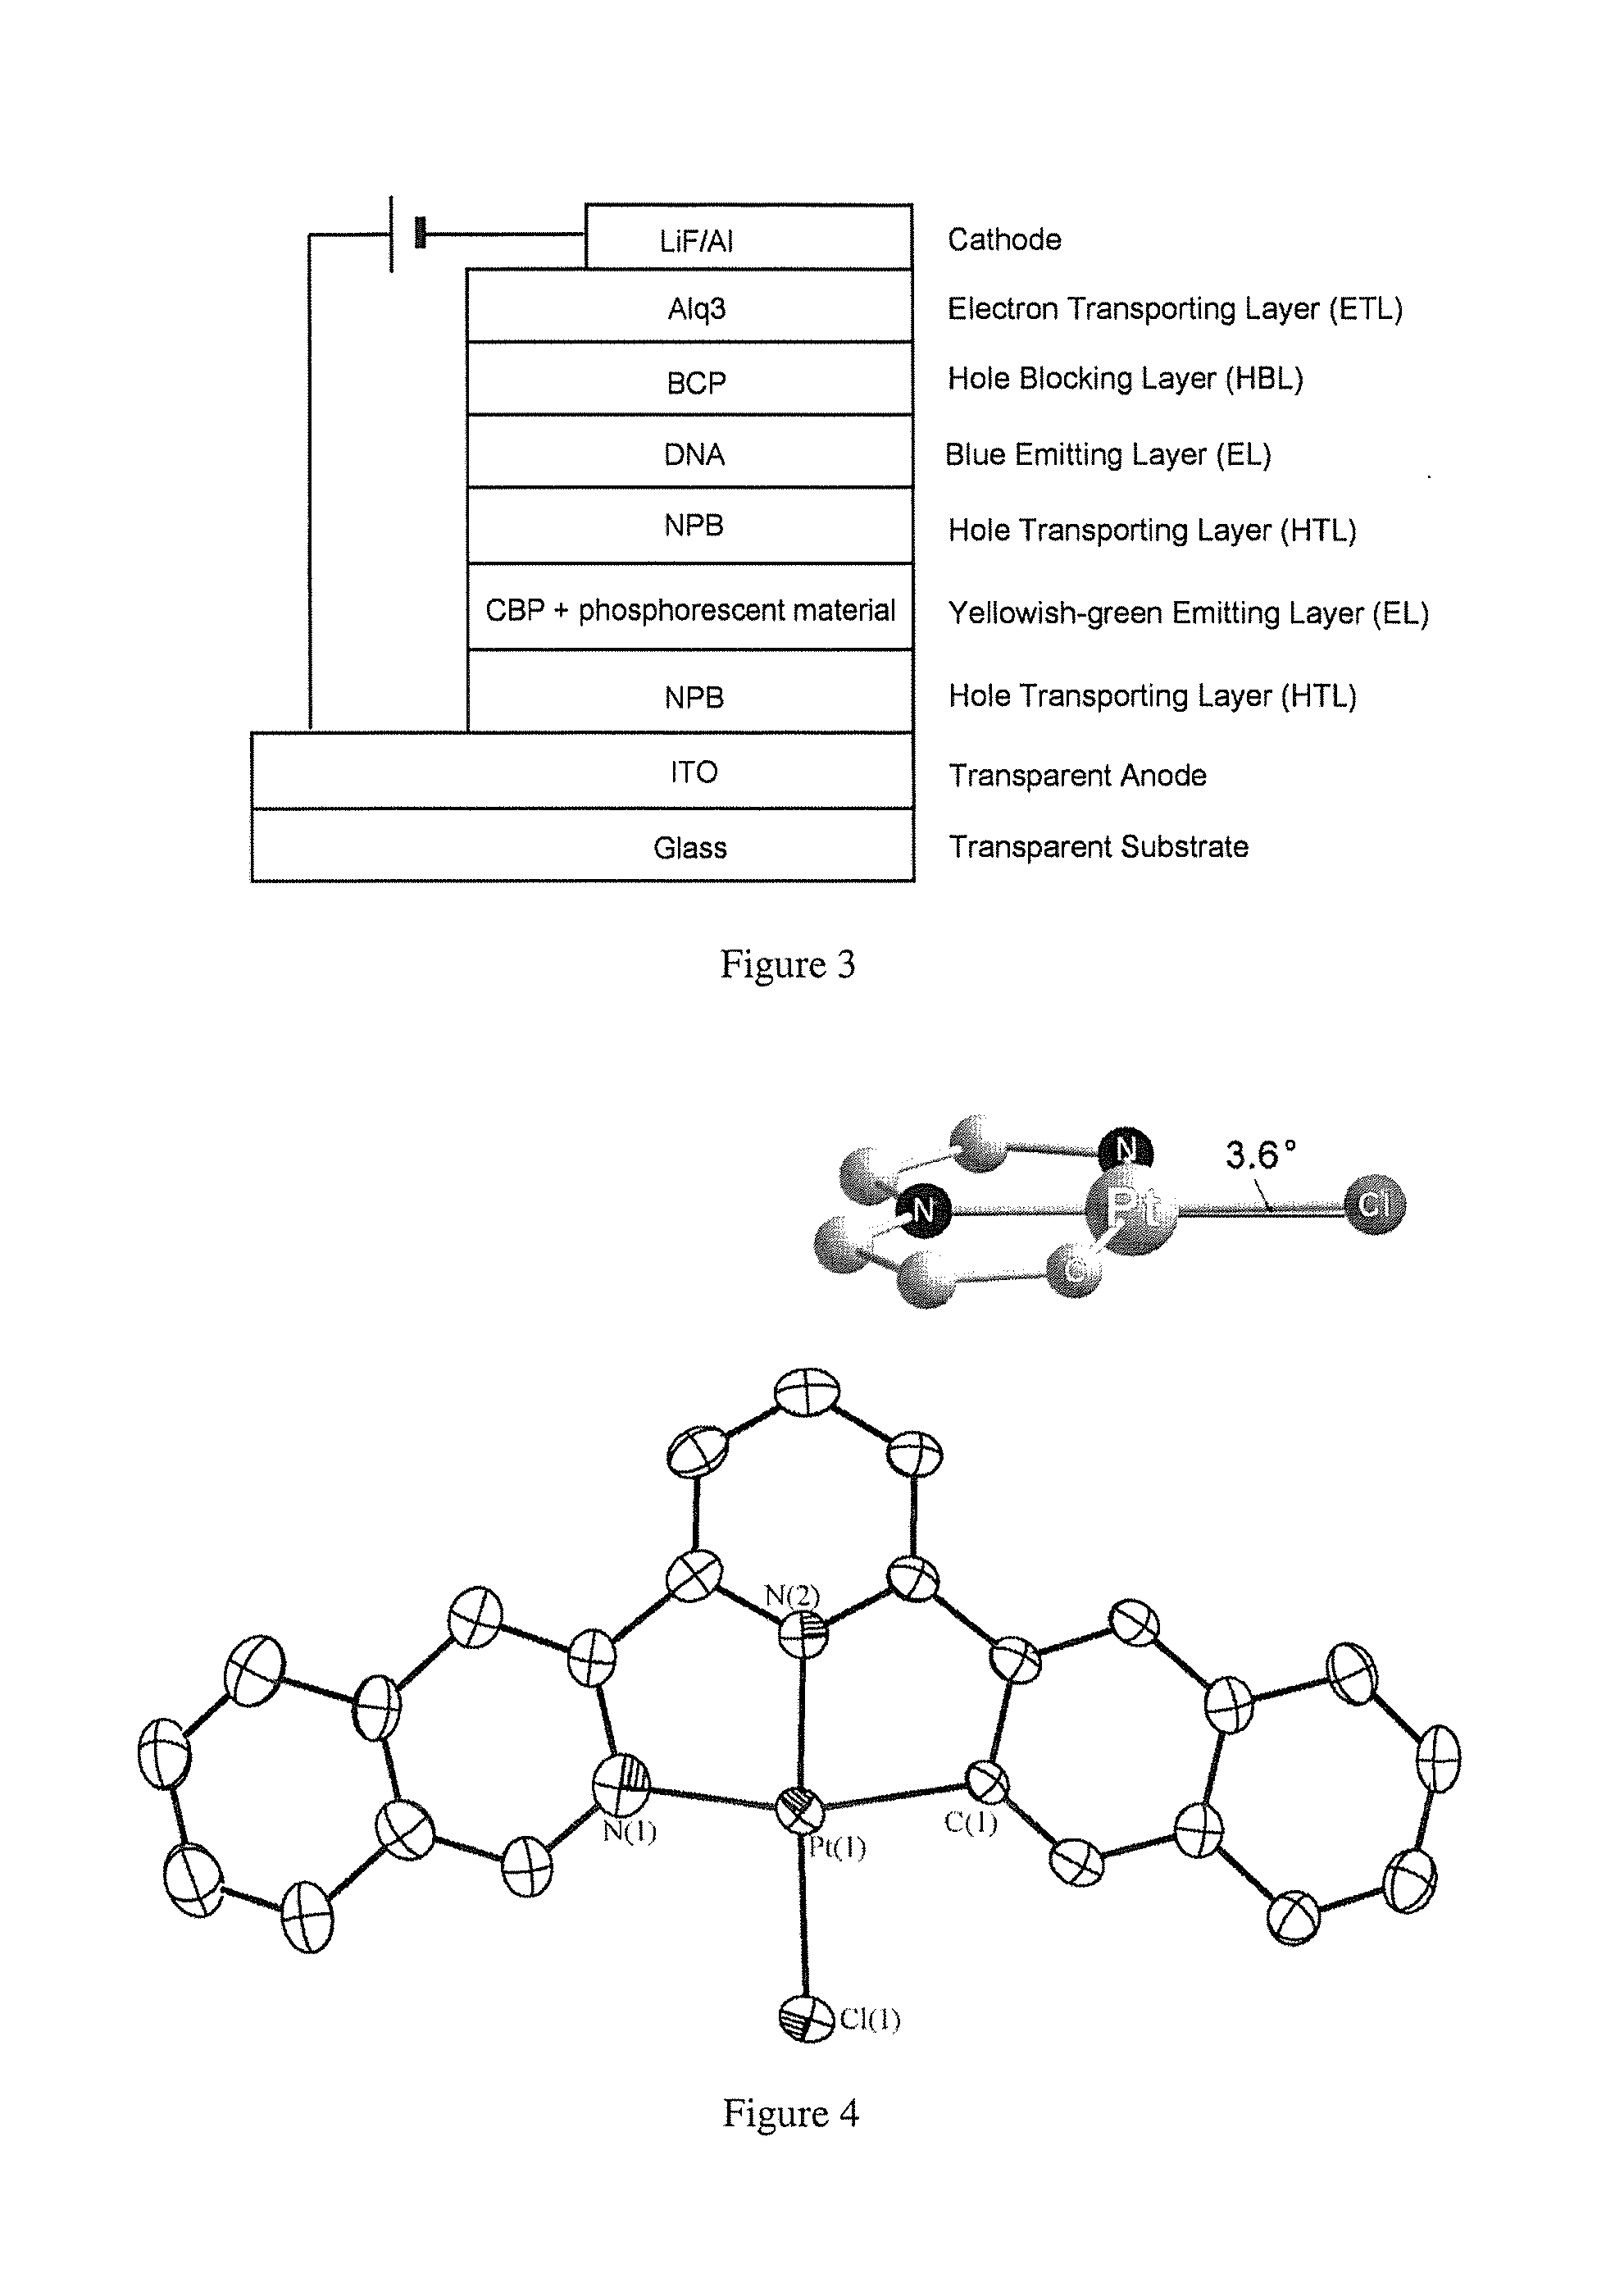 Extended pi-conjugated platinum (II) complexes